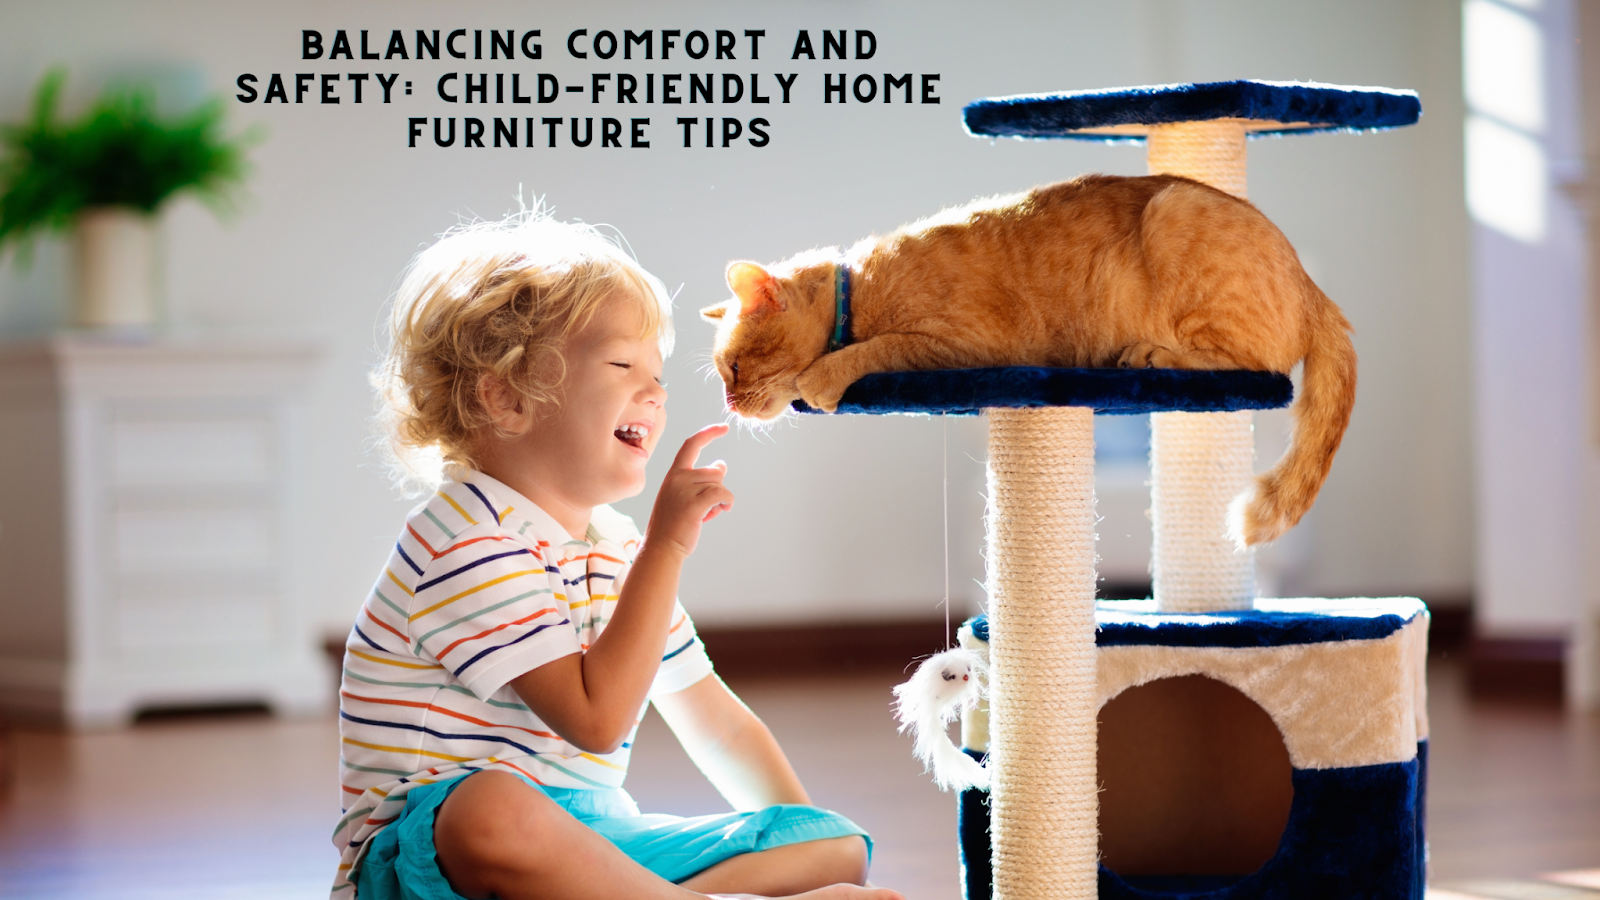 Balancing Comfort and Safety: Child-Friendly Home Furniture Tips